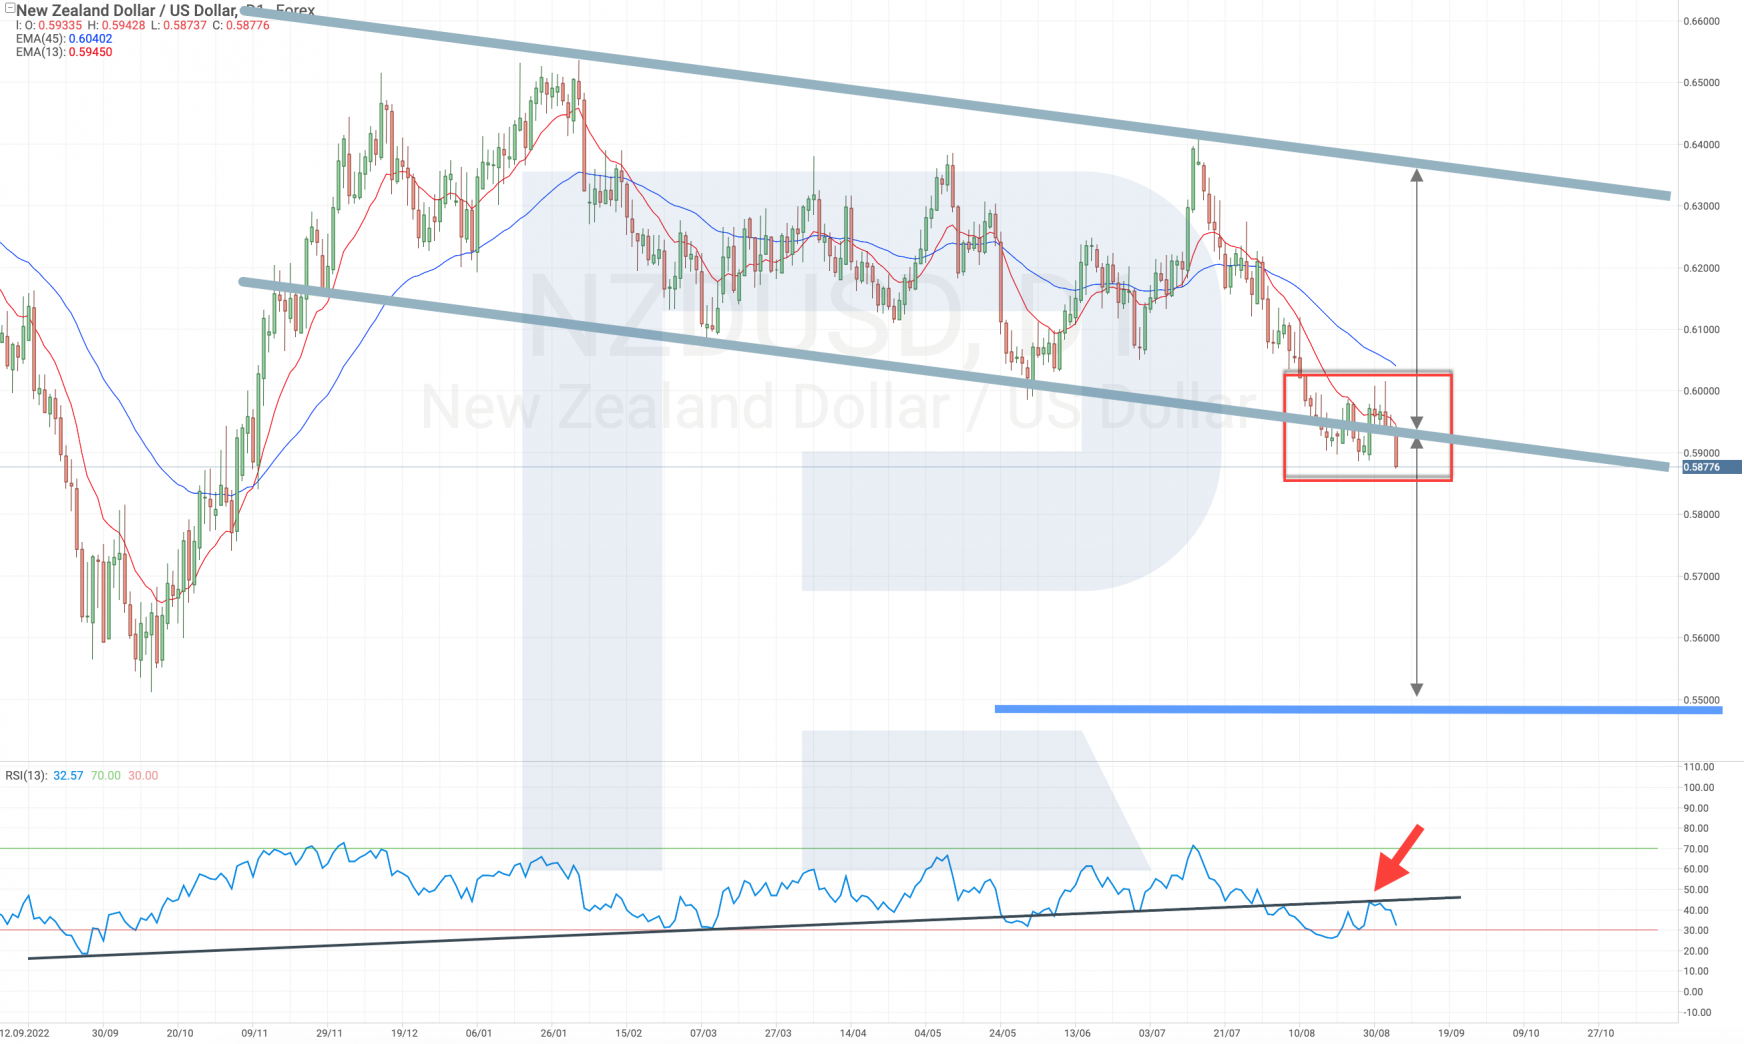 Technical analysis of the NZD/USD currency pair